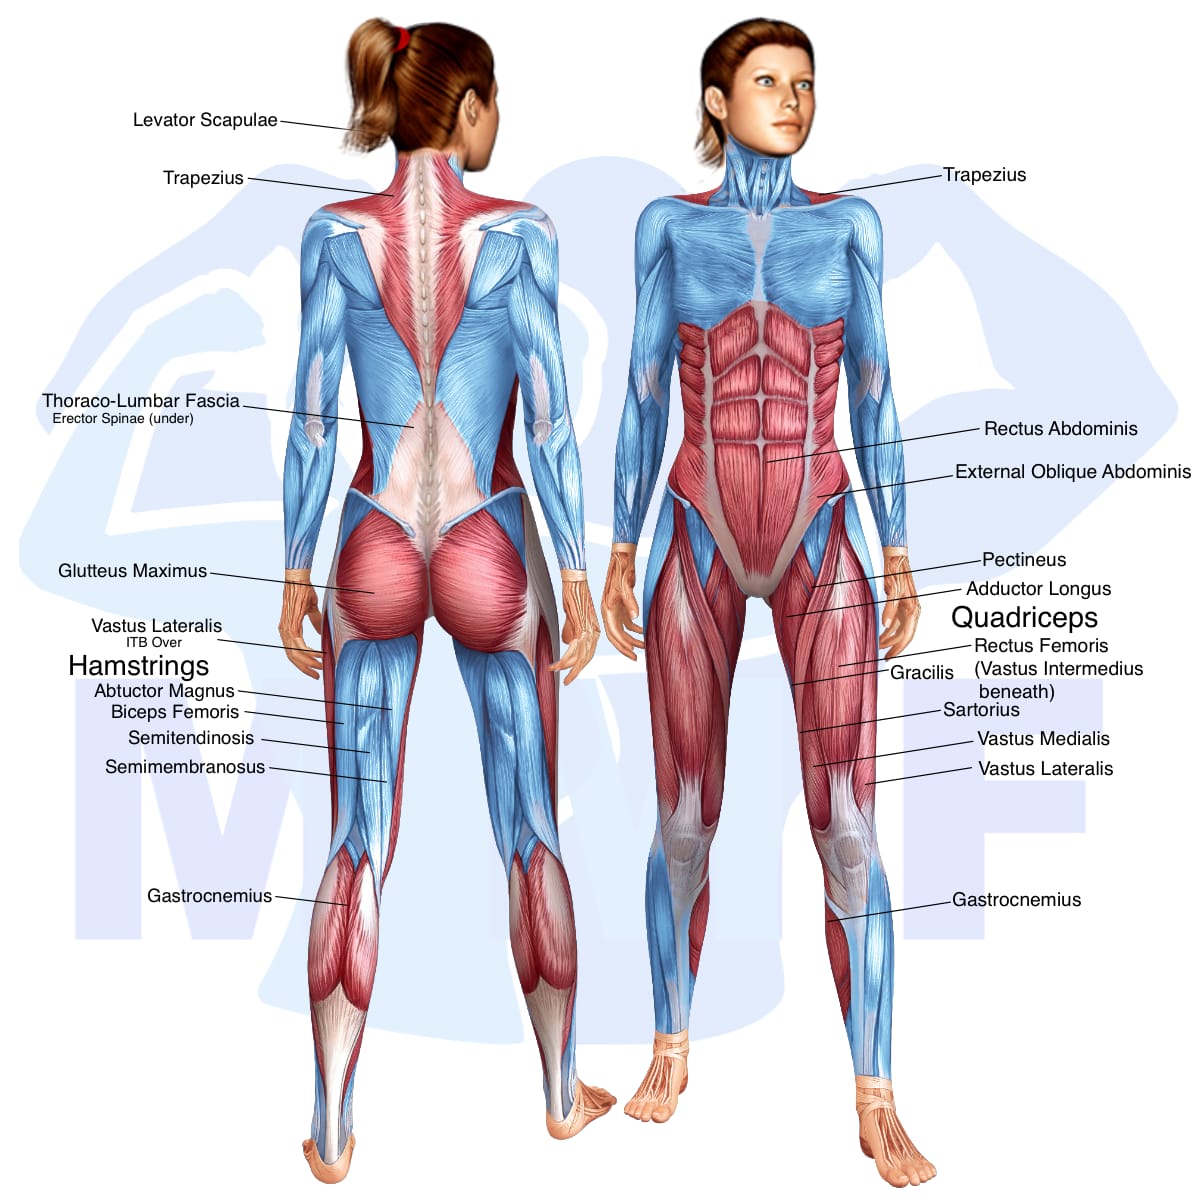 Image of the skeletal muscular system with the muscles used in the squat sidekick exercise highlighted in red and the rest in blue.